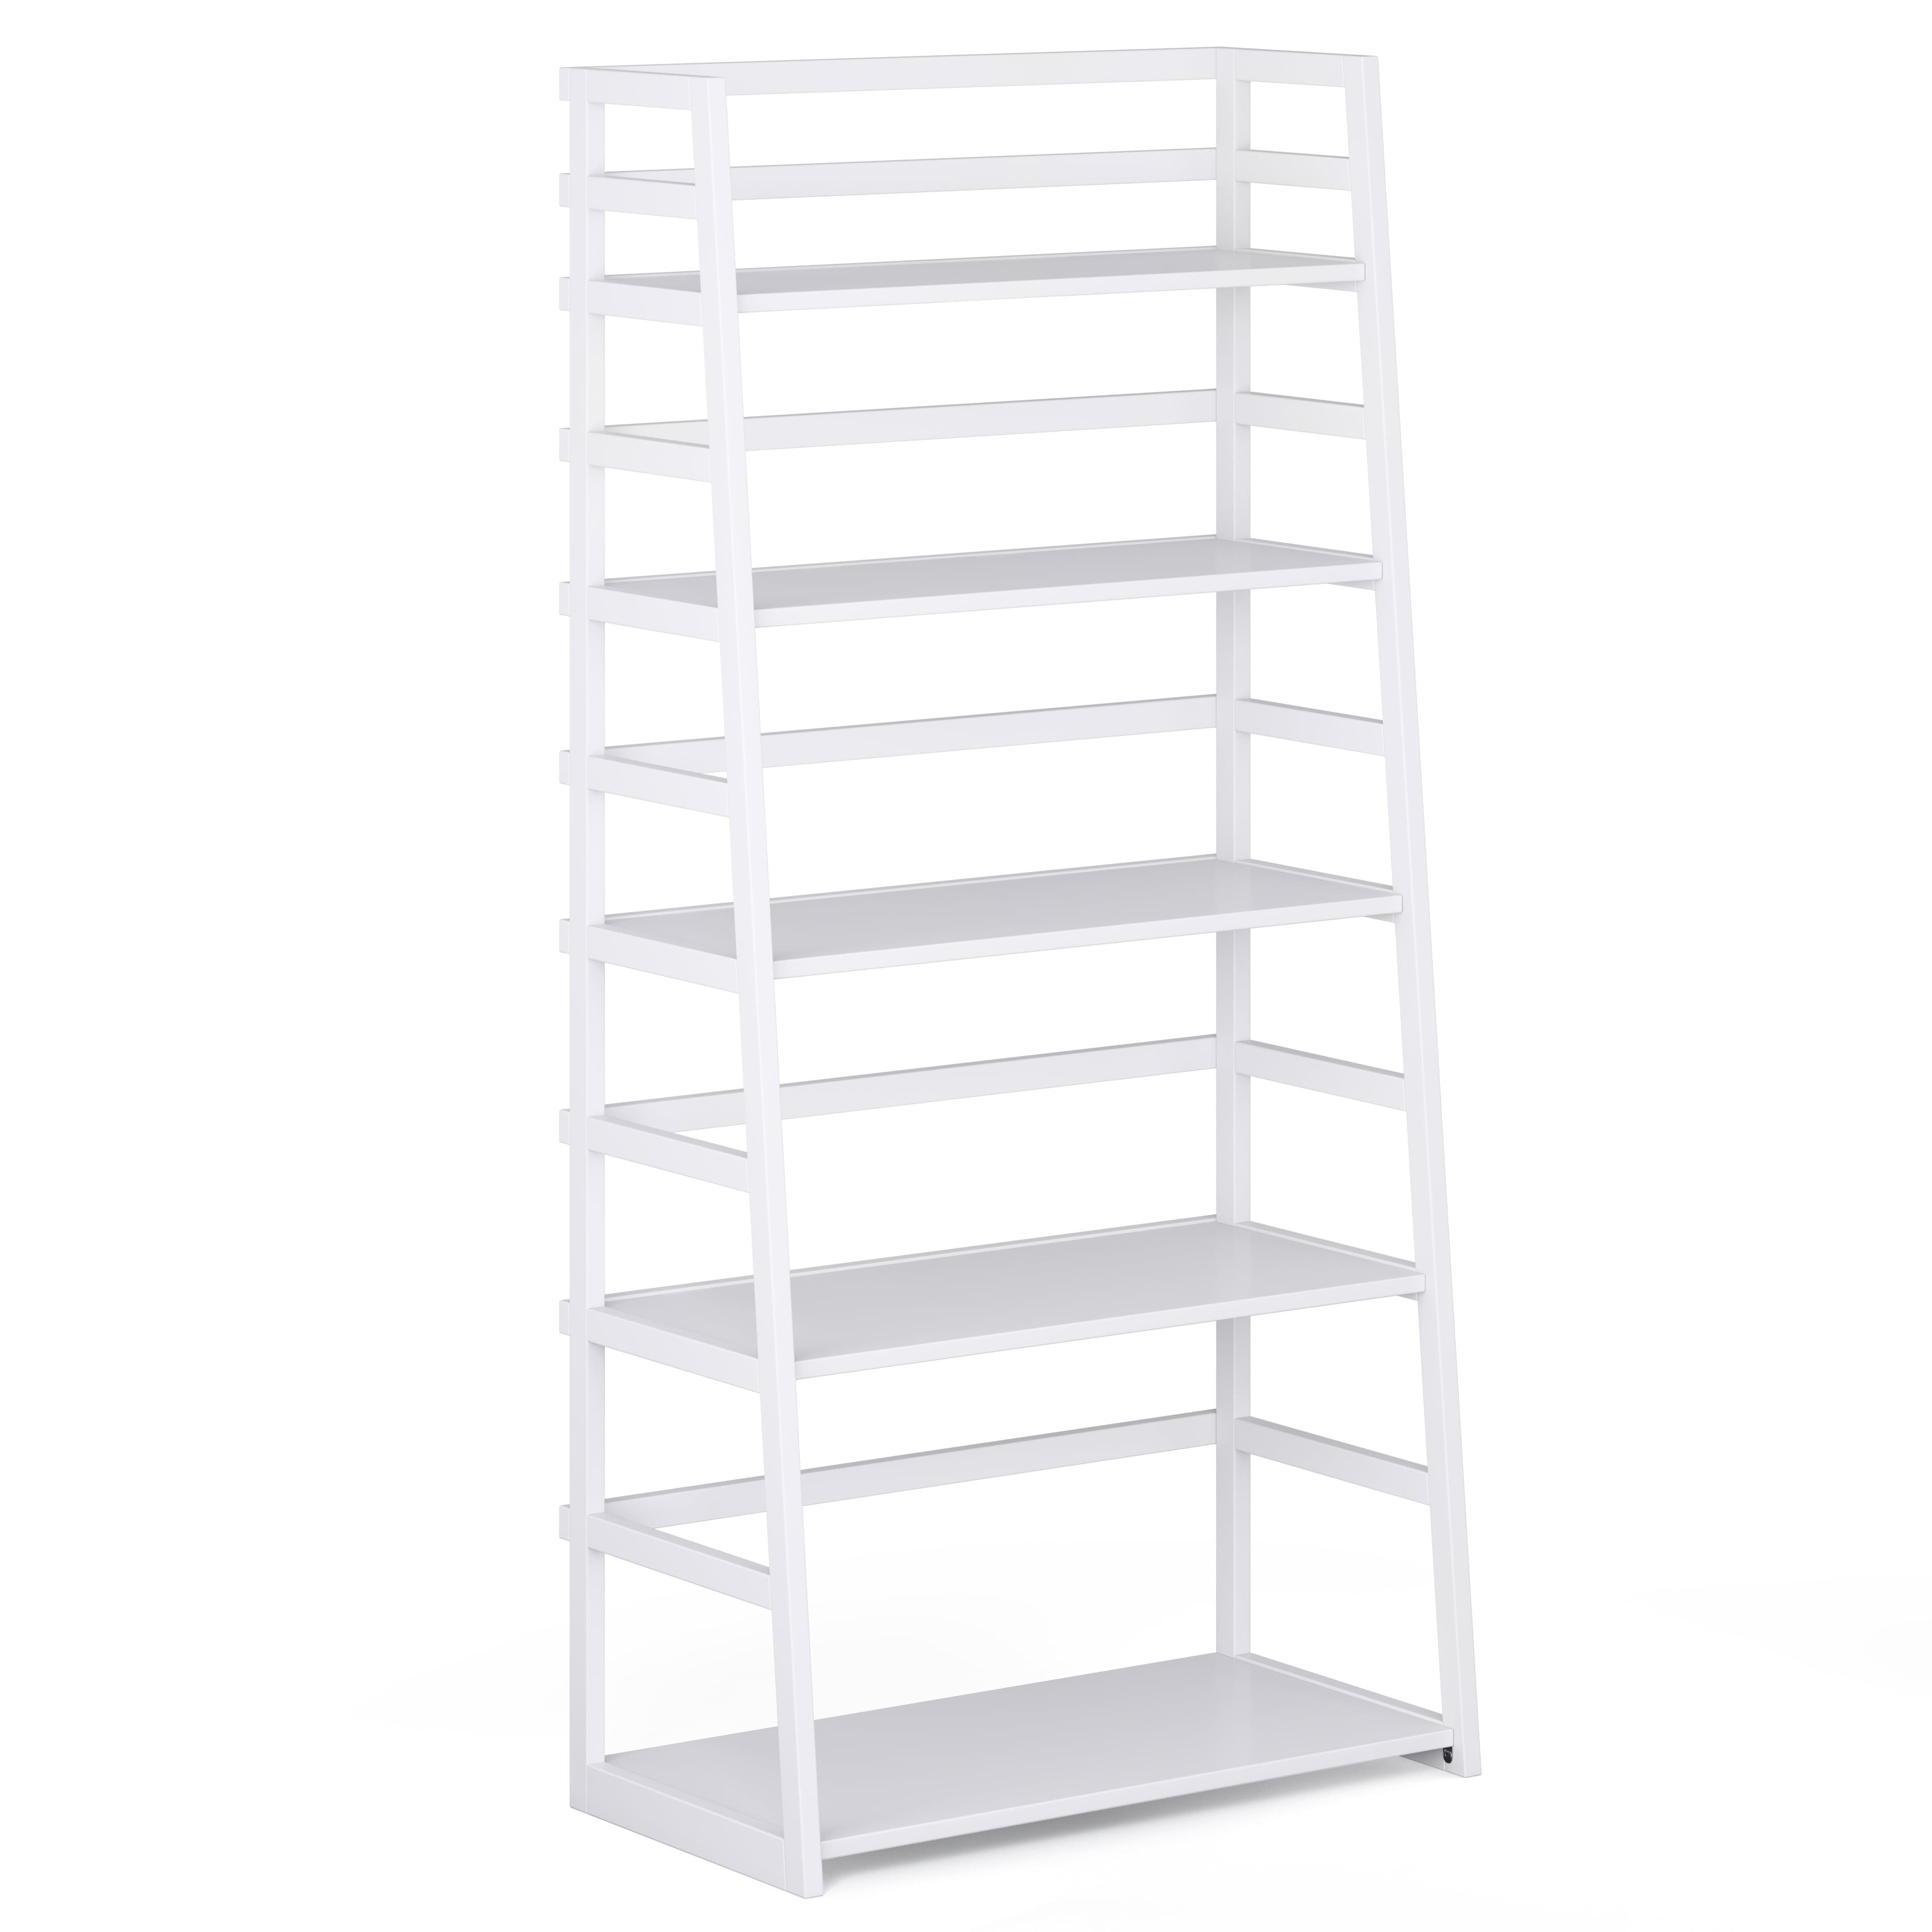 Acadian Solid Wood 4-Tier White Ladder Shelf Bookcase